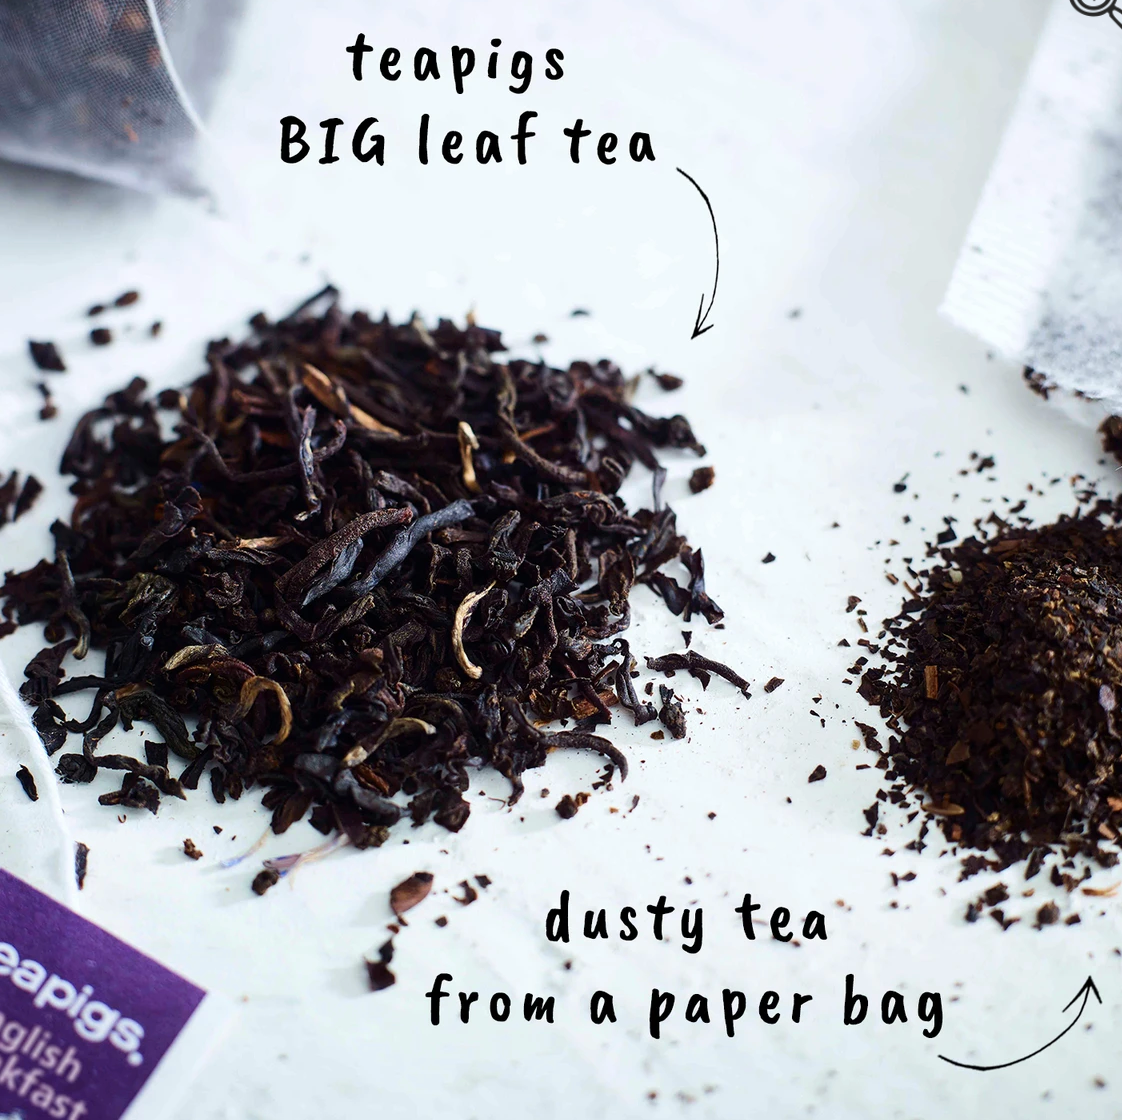 Pictured are two piles of loose tea. One has big leaves and one is ground. The pile with leaves has an arrow pointing at it and the words "teapigs BIG leaf tea." The ground pile has an arrow and the words "dusty tea from a paper bag."